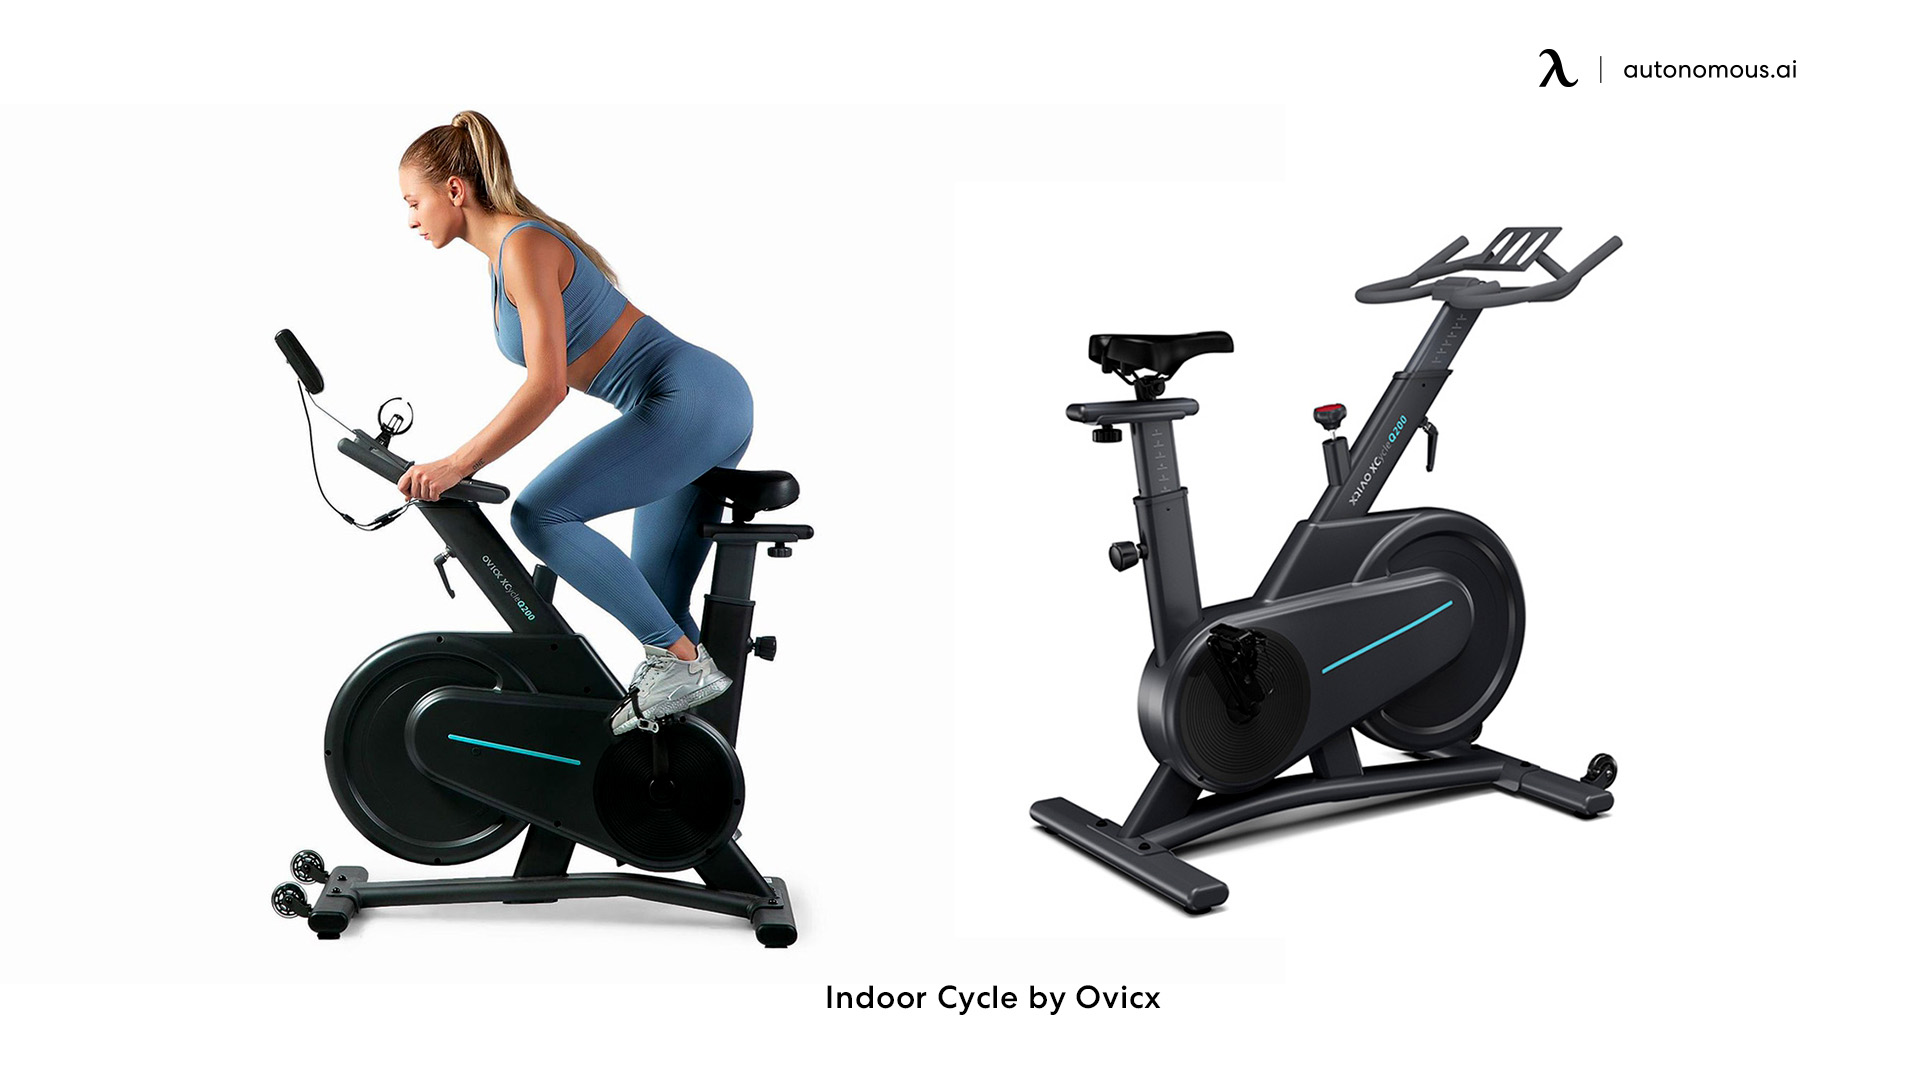 Indoor Cycle by OVICX personal training equipment